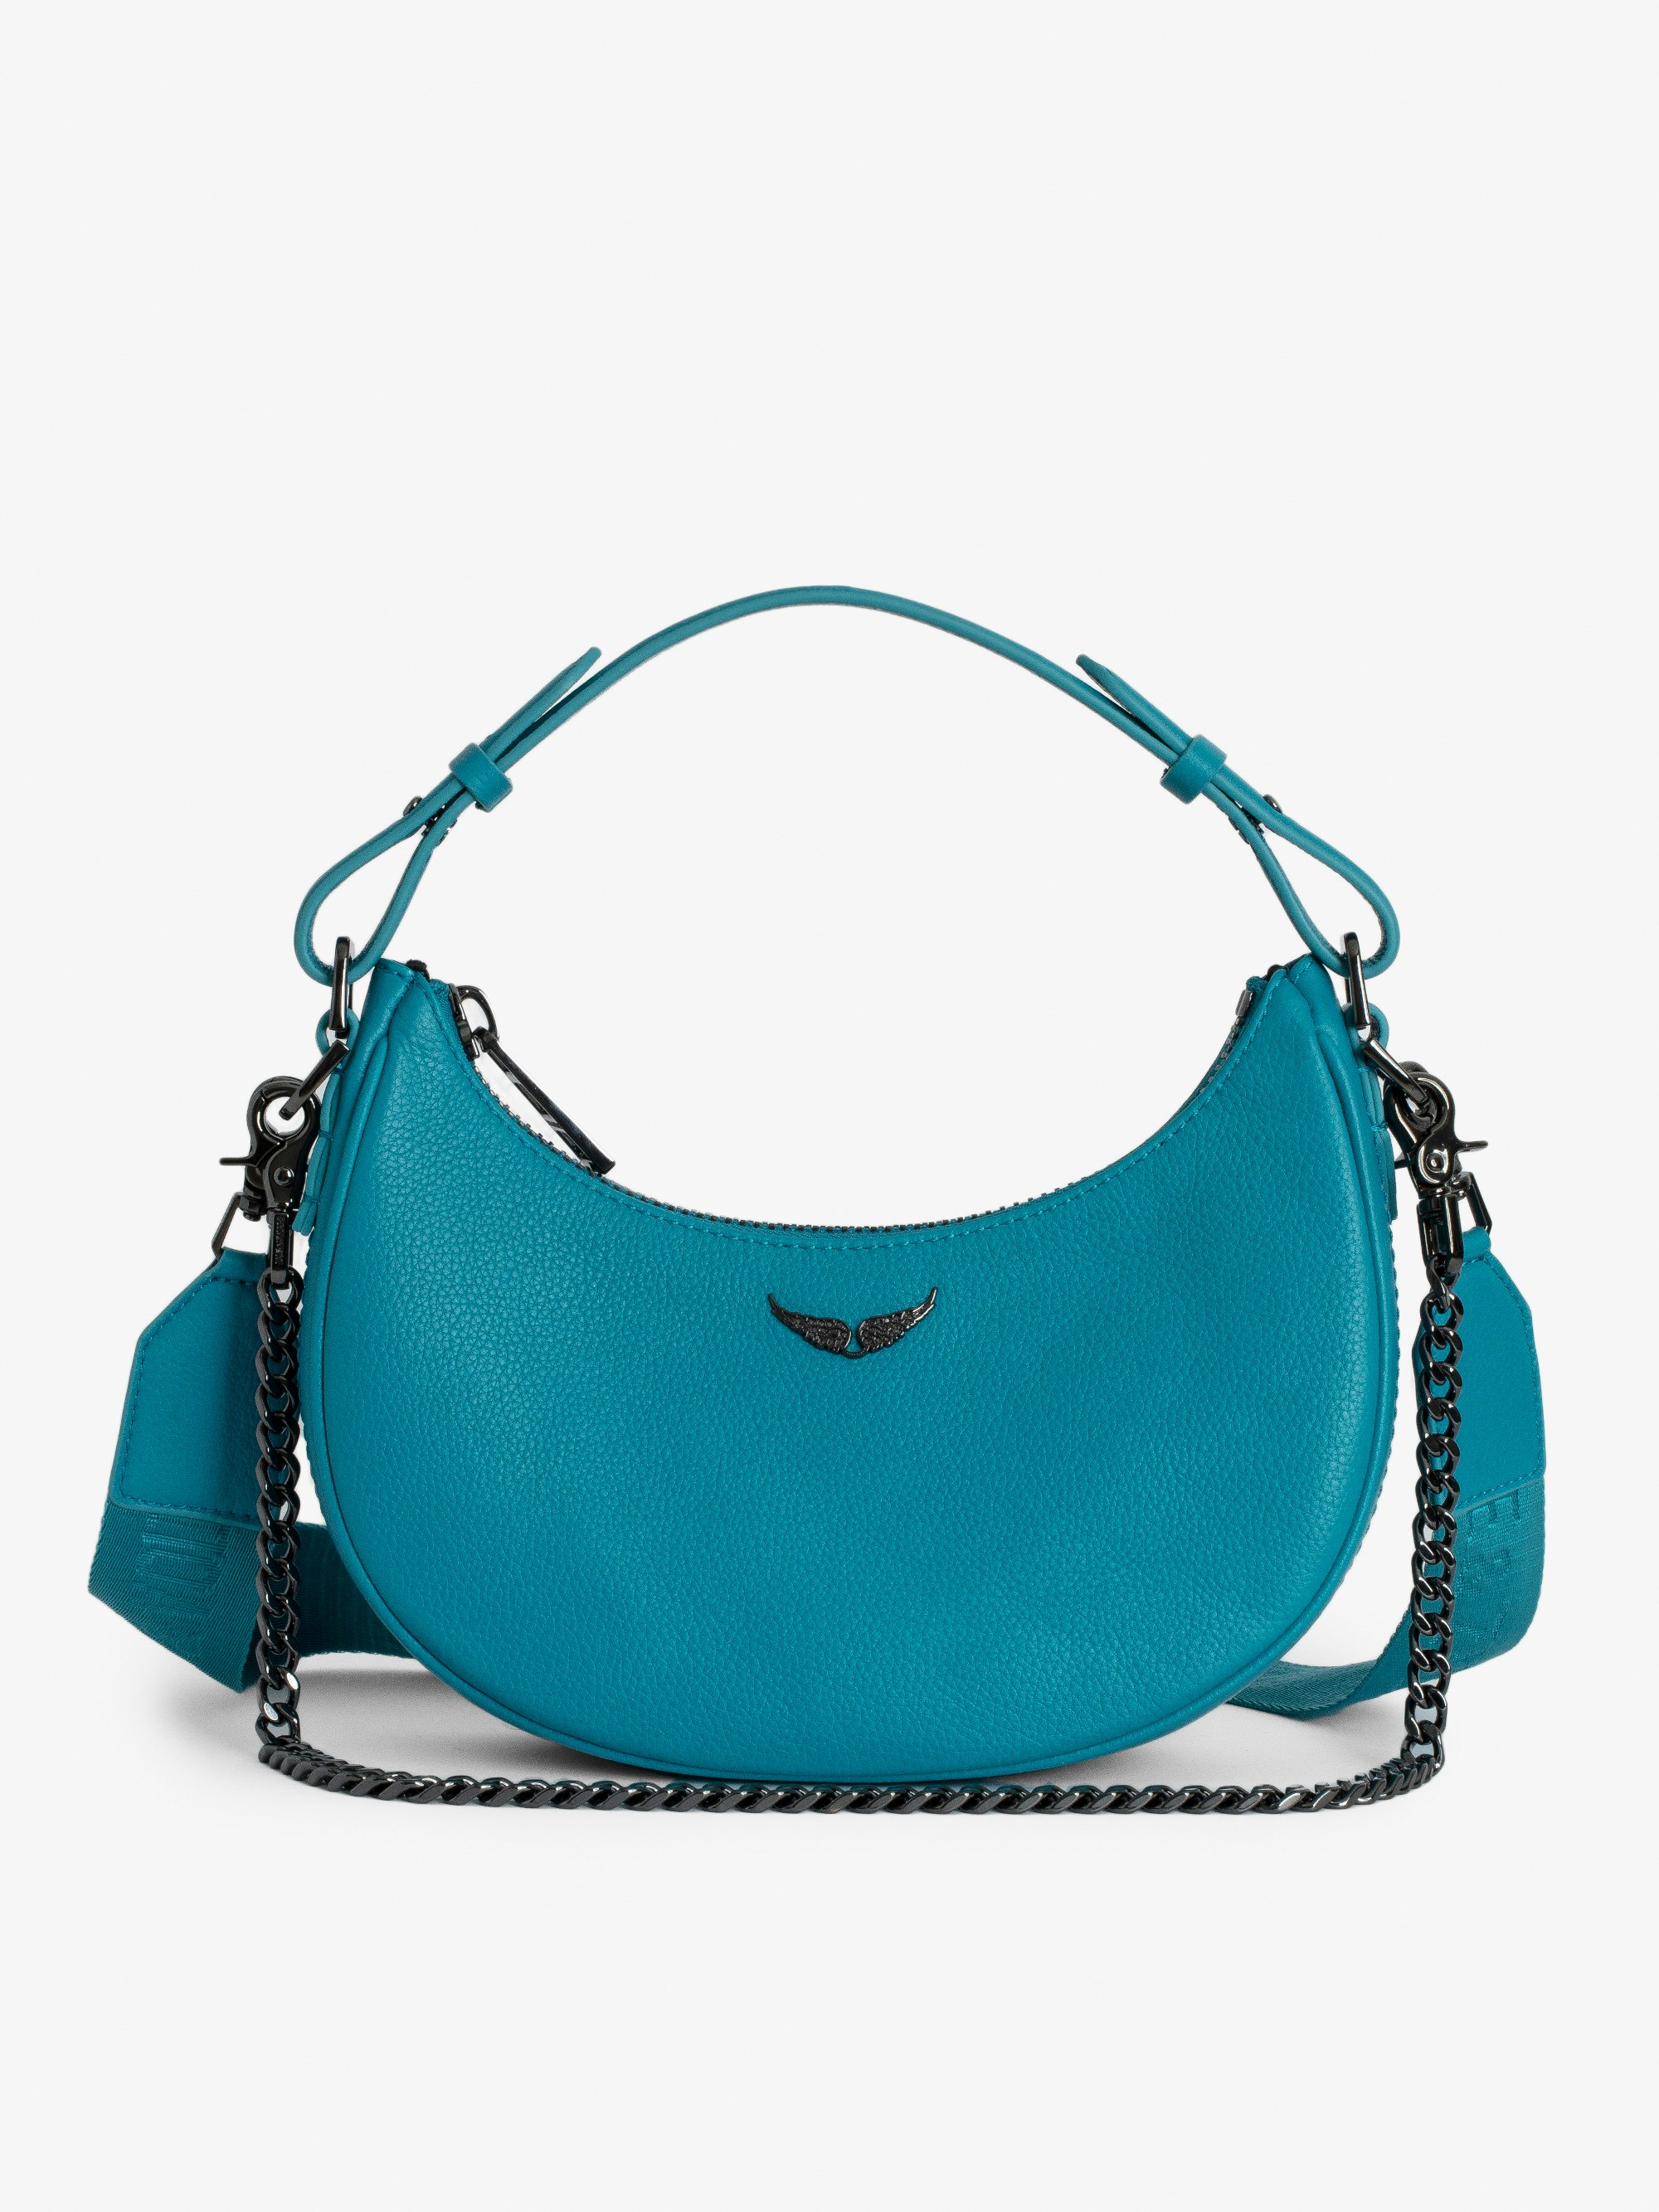 Moonrock Bag - Half-moon bag in grained leather with handle, shoulder strap, chain and signature wings.